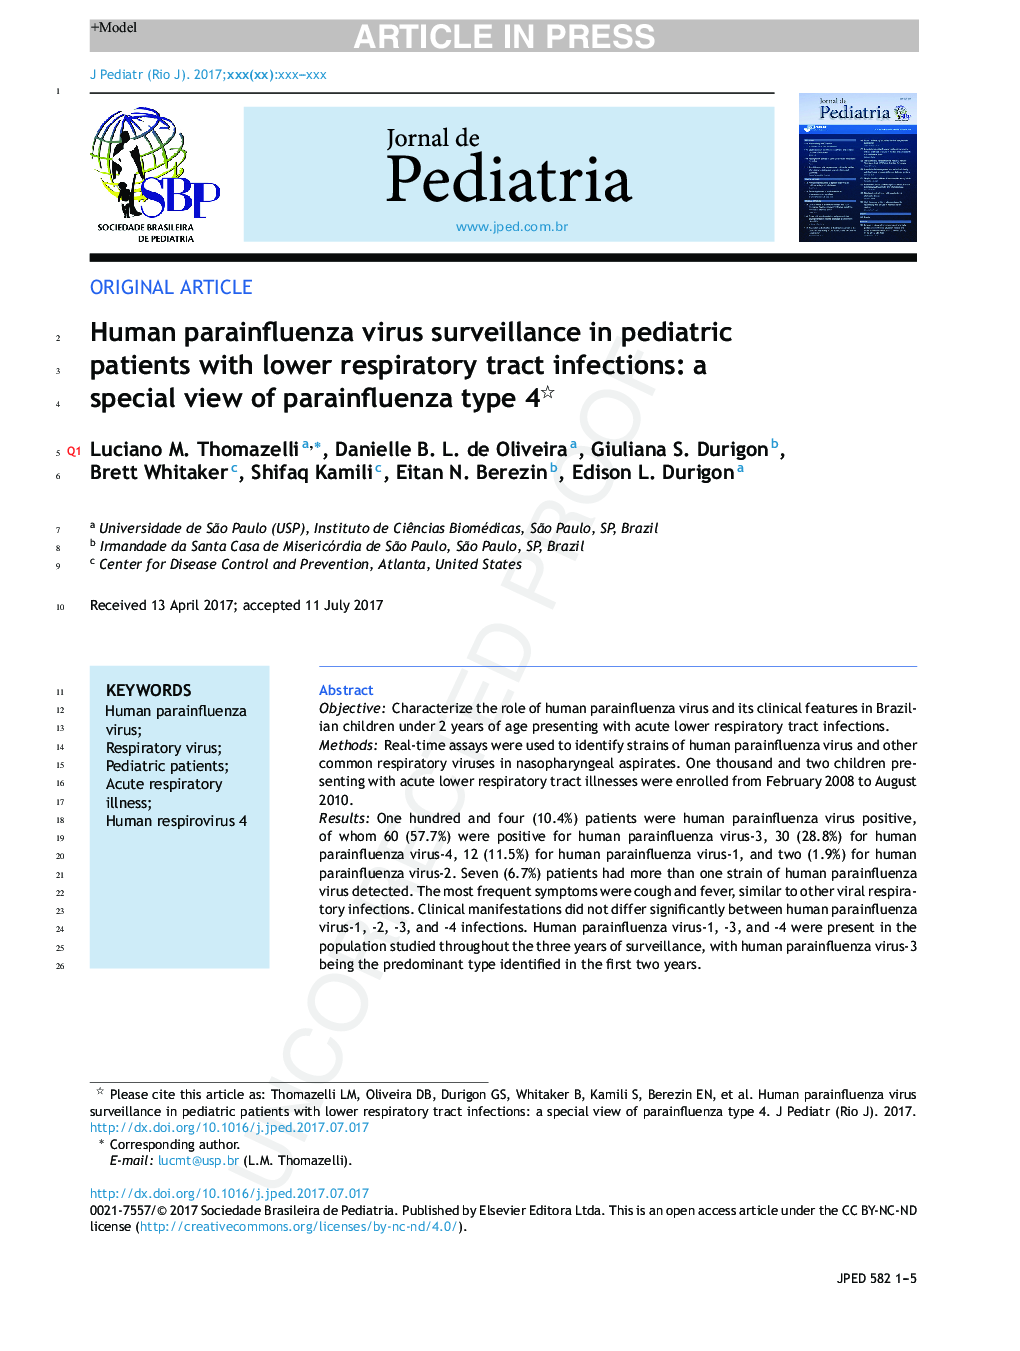 Human parainfluenza virus surveillance in pediatric patients with lower respiratory tract infections: a special view of parainfluenza type 4